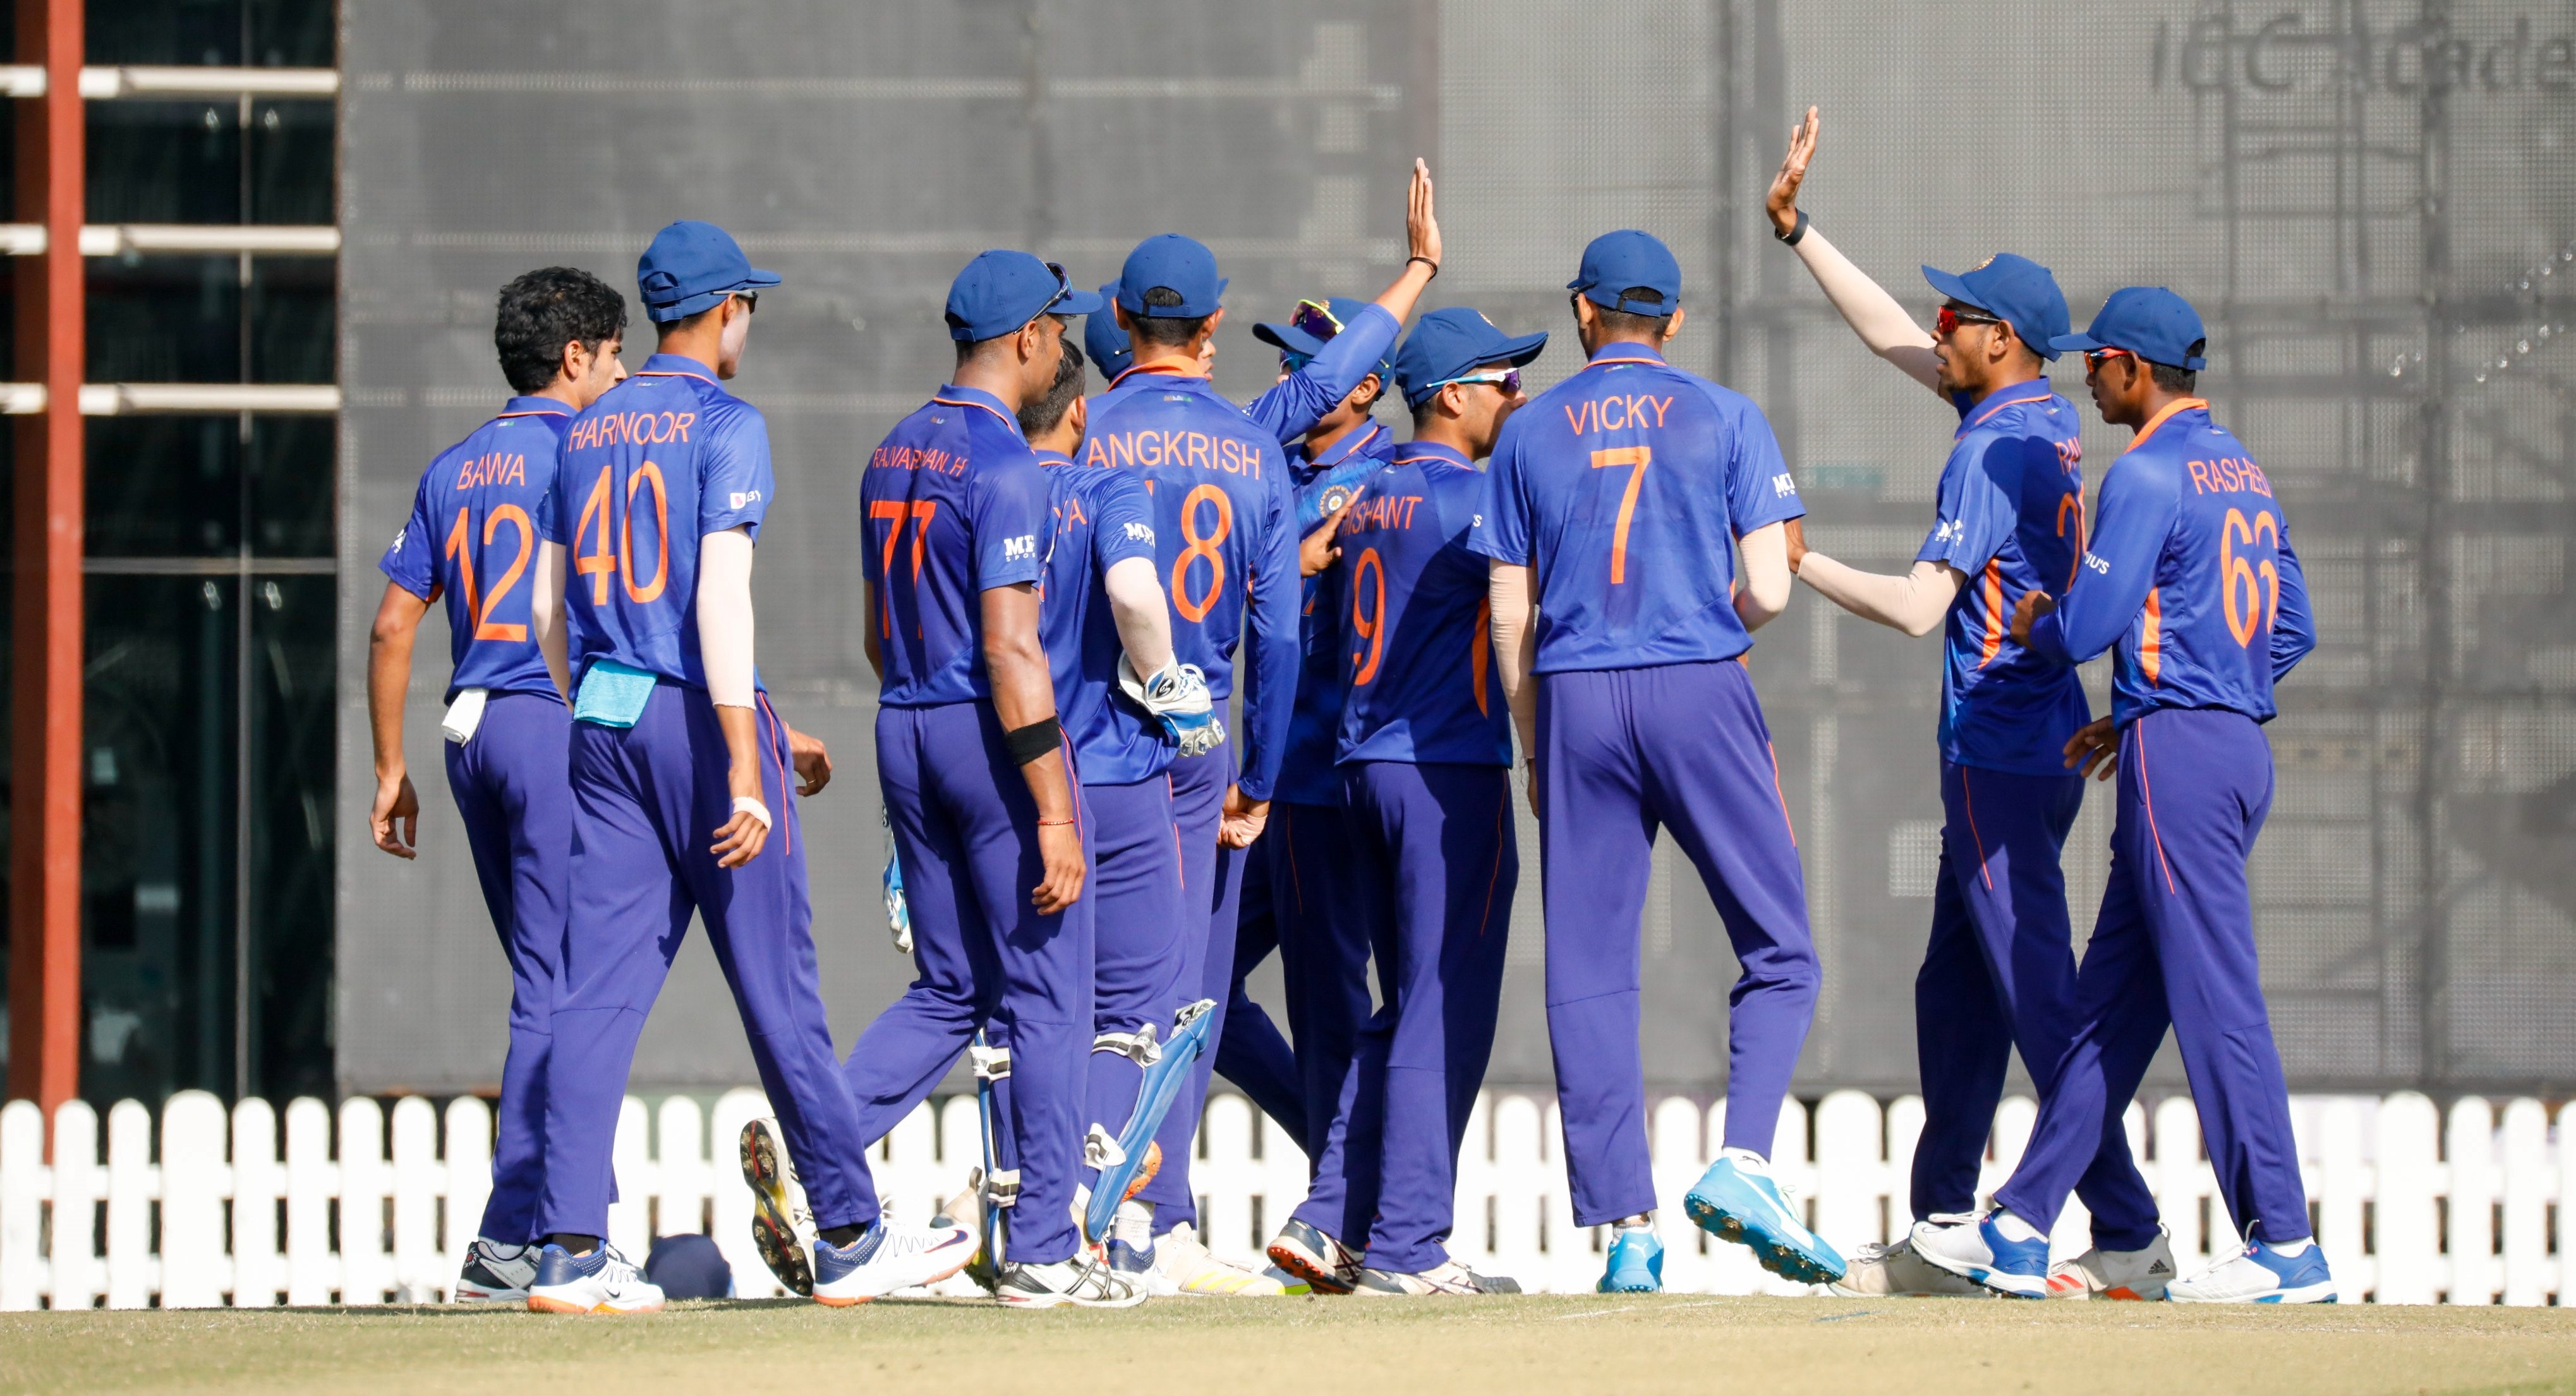 India U-19 defeated Afghanistan U-19 in their last league match | ACC/Twitter